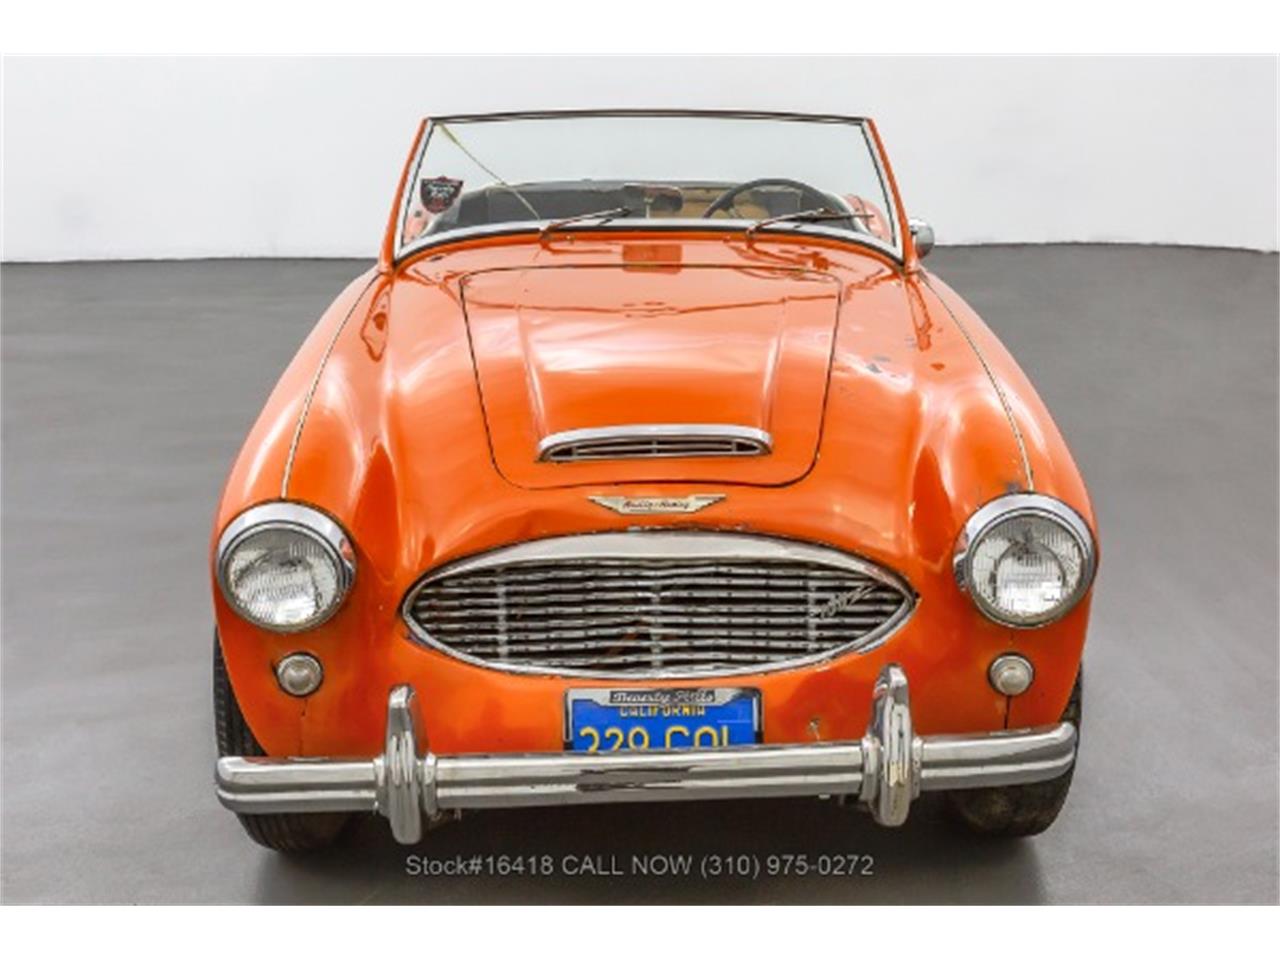 For Sale: 1959 Austin-Healey 100-6 in Beverly Hills, California for sale in Beverly Hills, CA